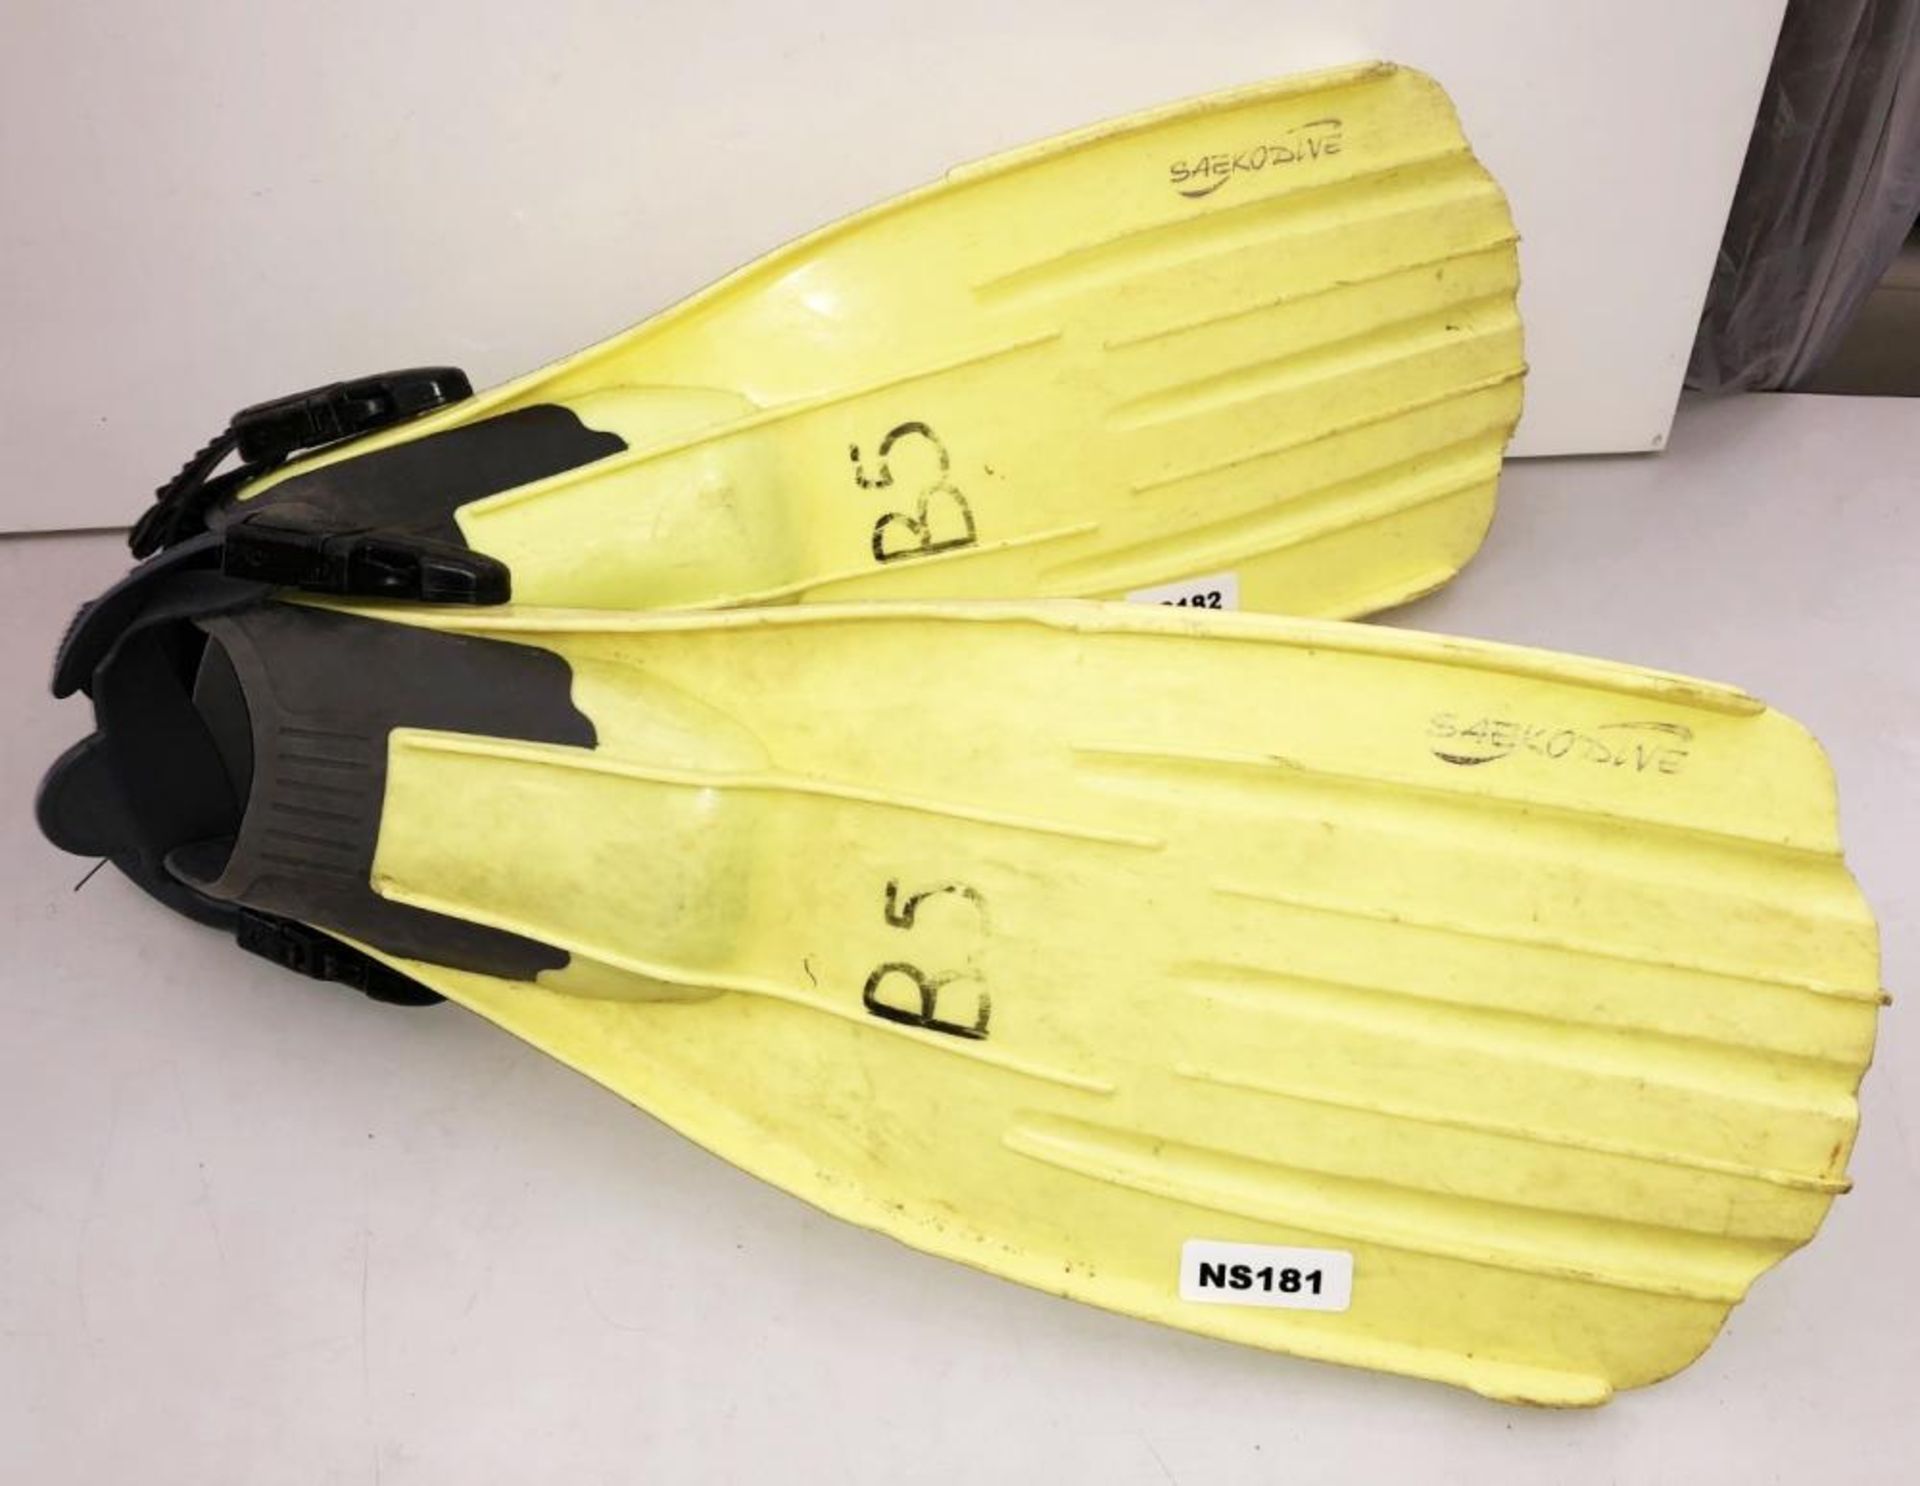 5 x Pairs Of Branded Diving Fins - Ref: NS175, NS176, NS177, NS178, NS179, NS180, NS181, NS182, NS18 - Image 16 of 17